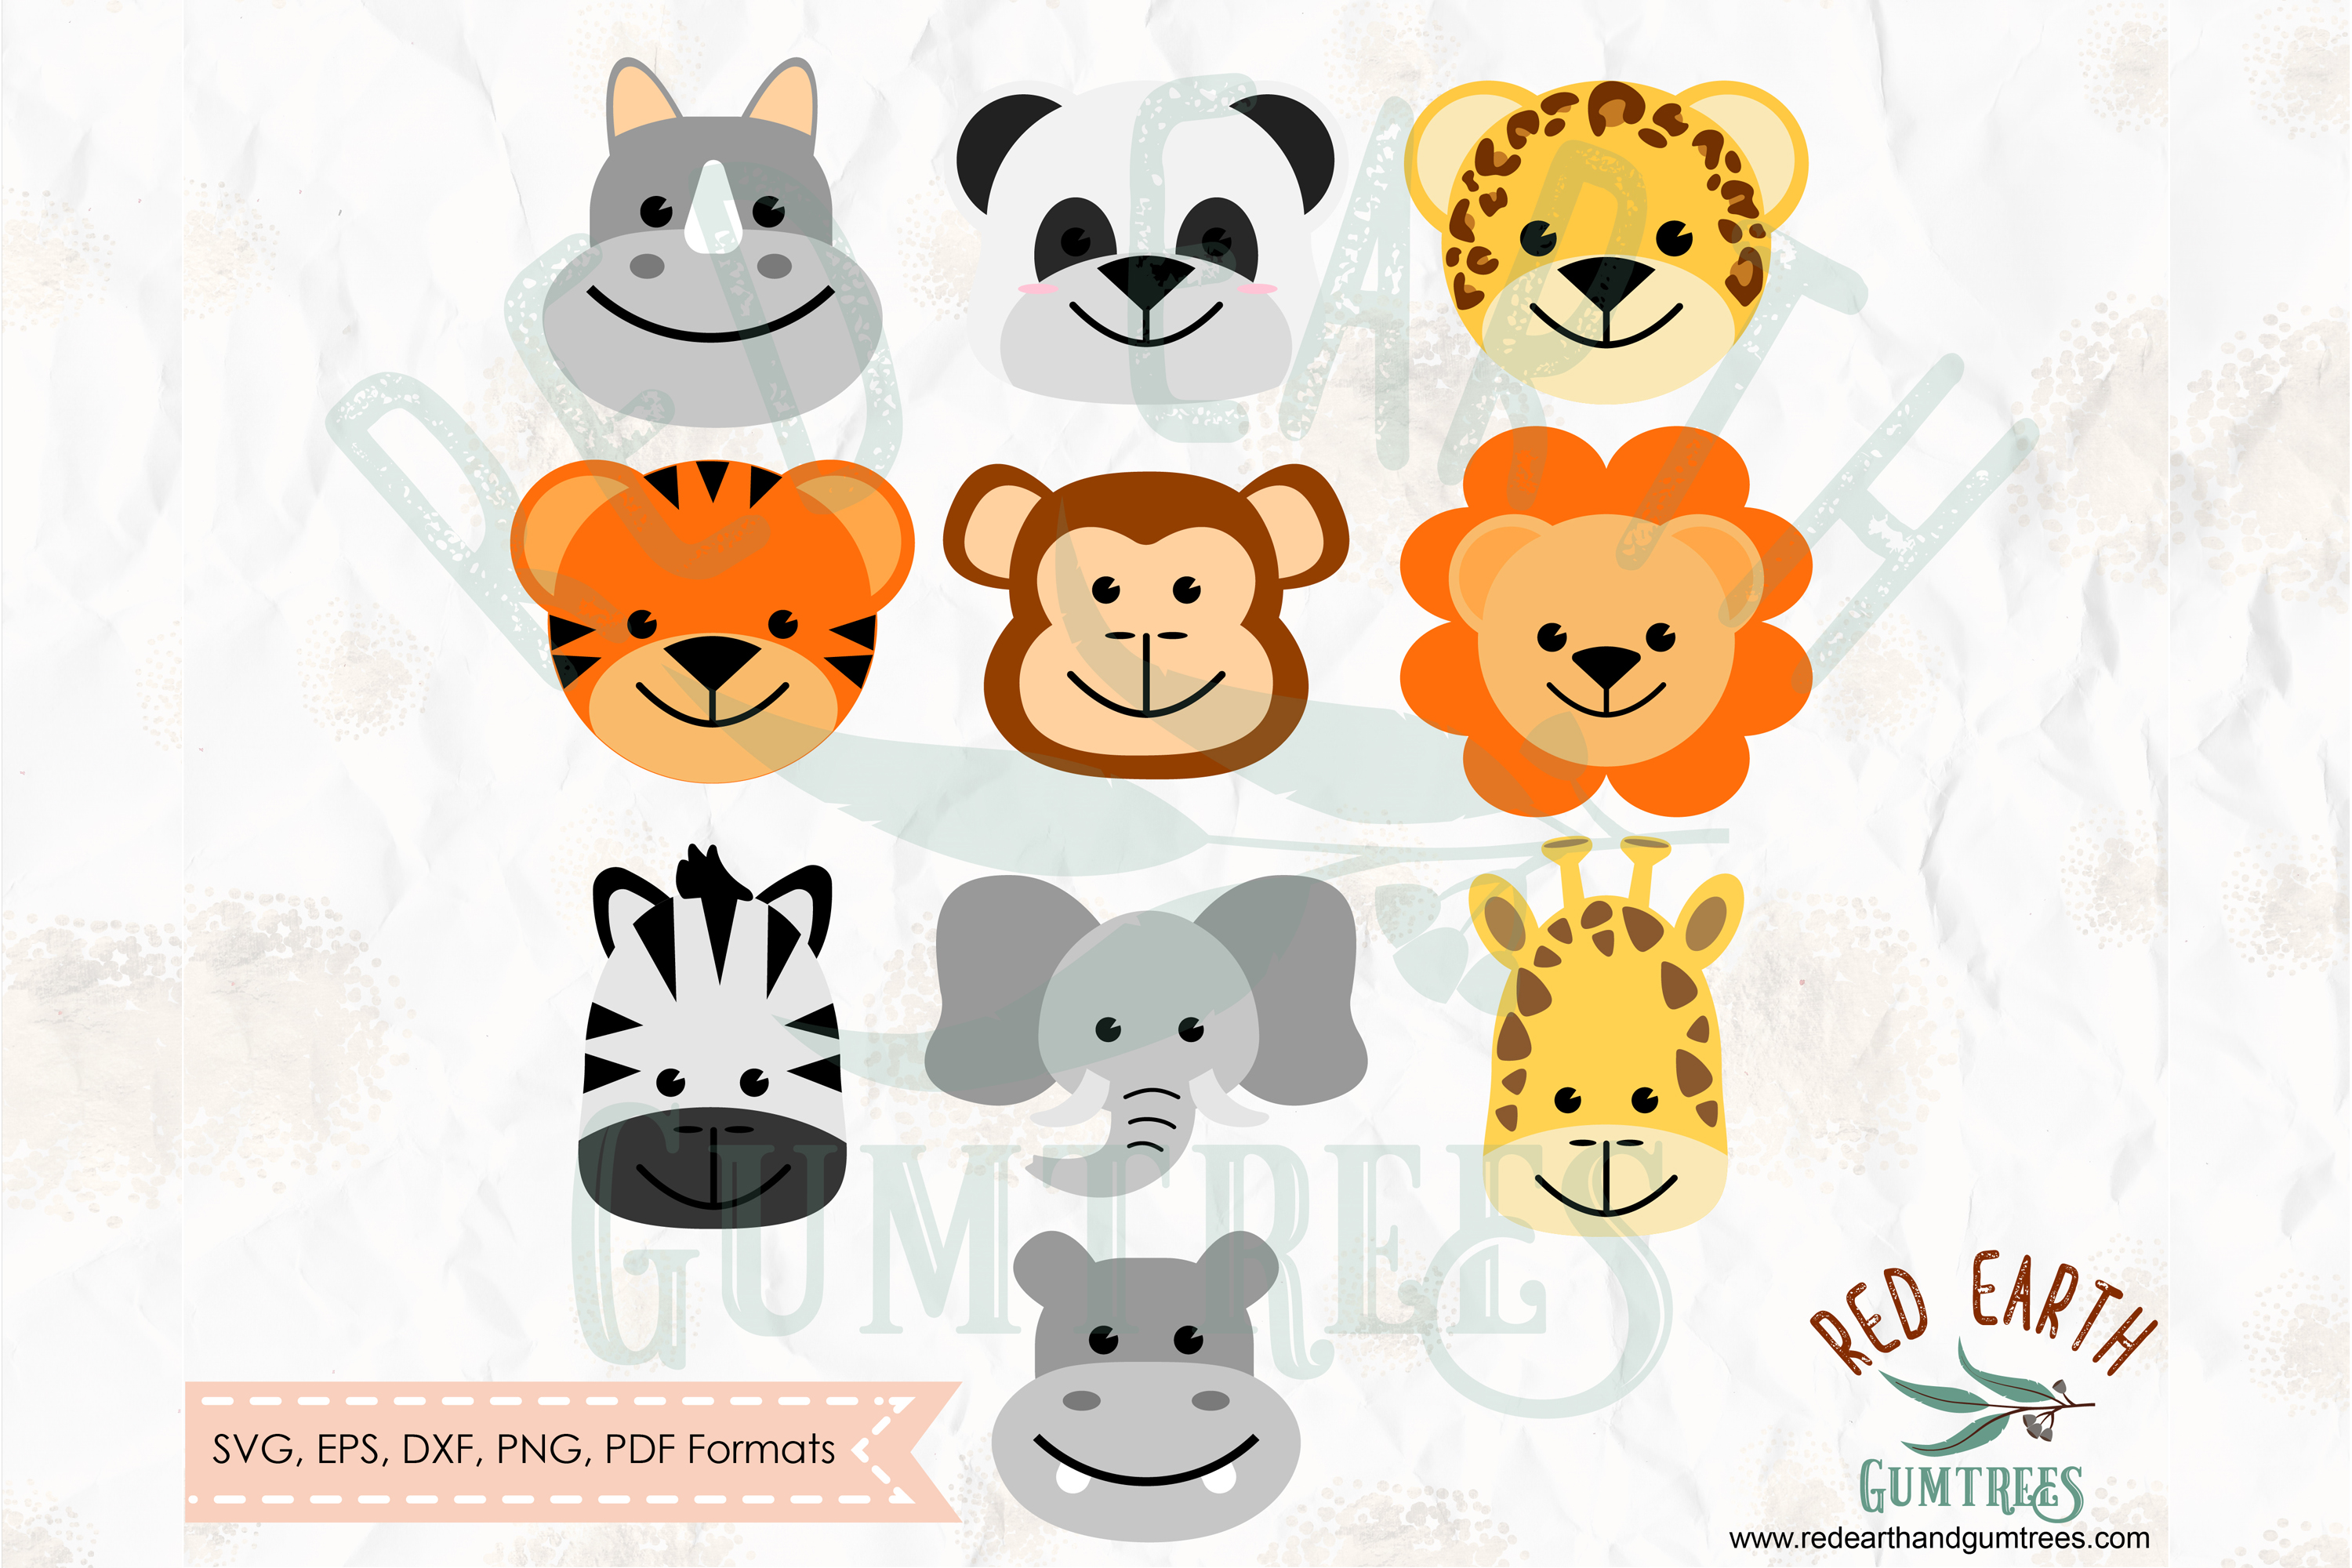 Download Cute Baby animals safari theme in SVG,DXF,PNG,EPS,PDF format